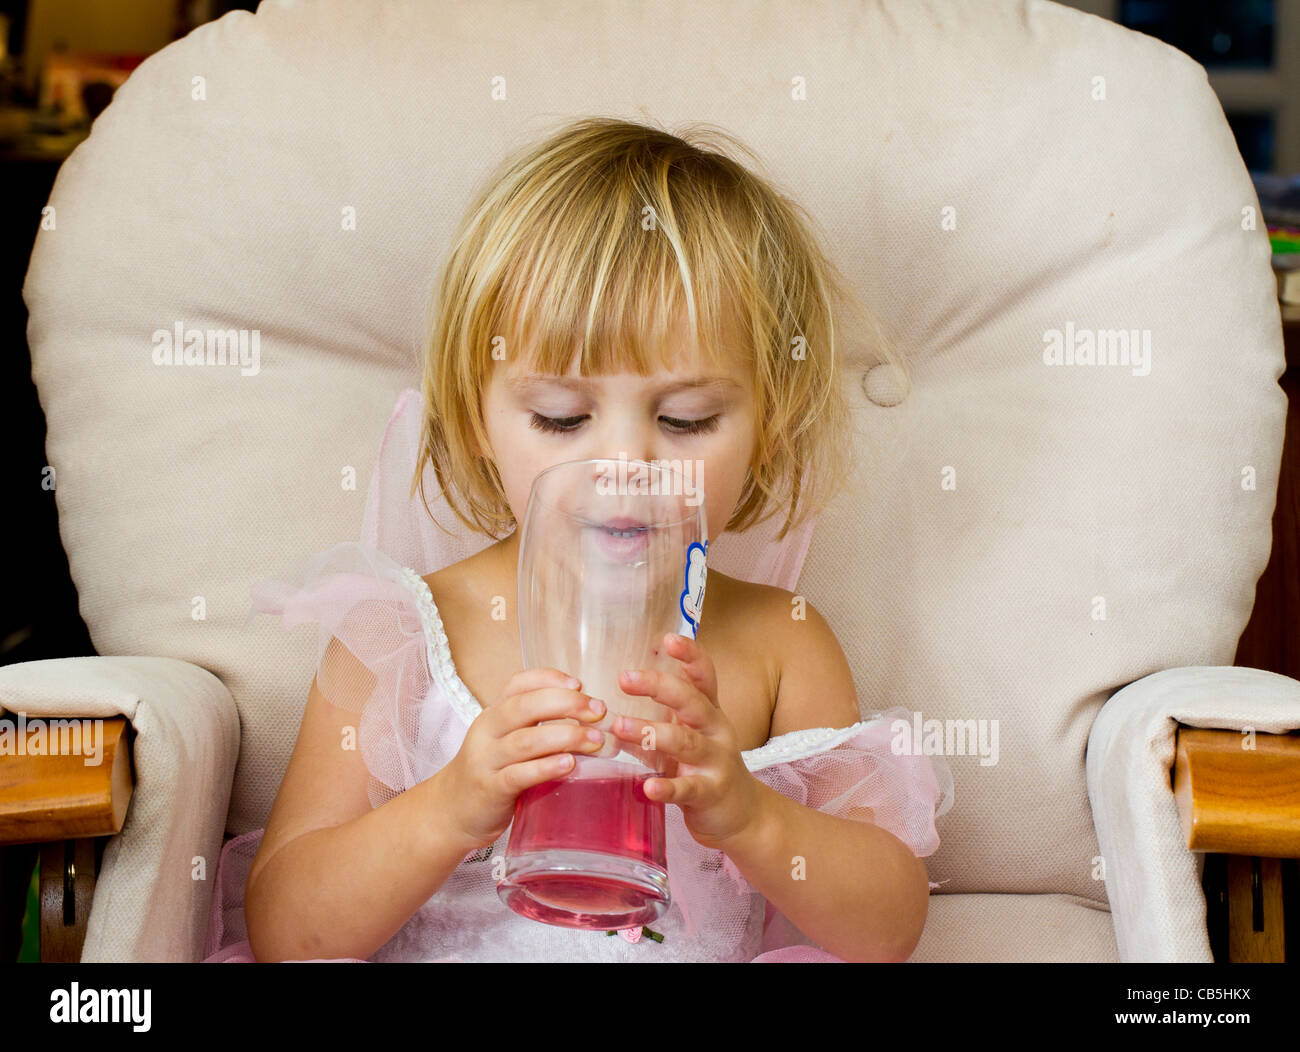 Little girl seated in a big chair, drinking a pink (blackcurrant) drink from a pint glass Stock Photo